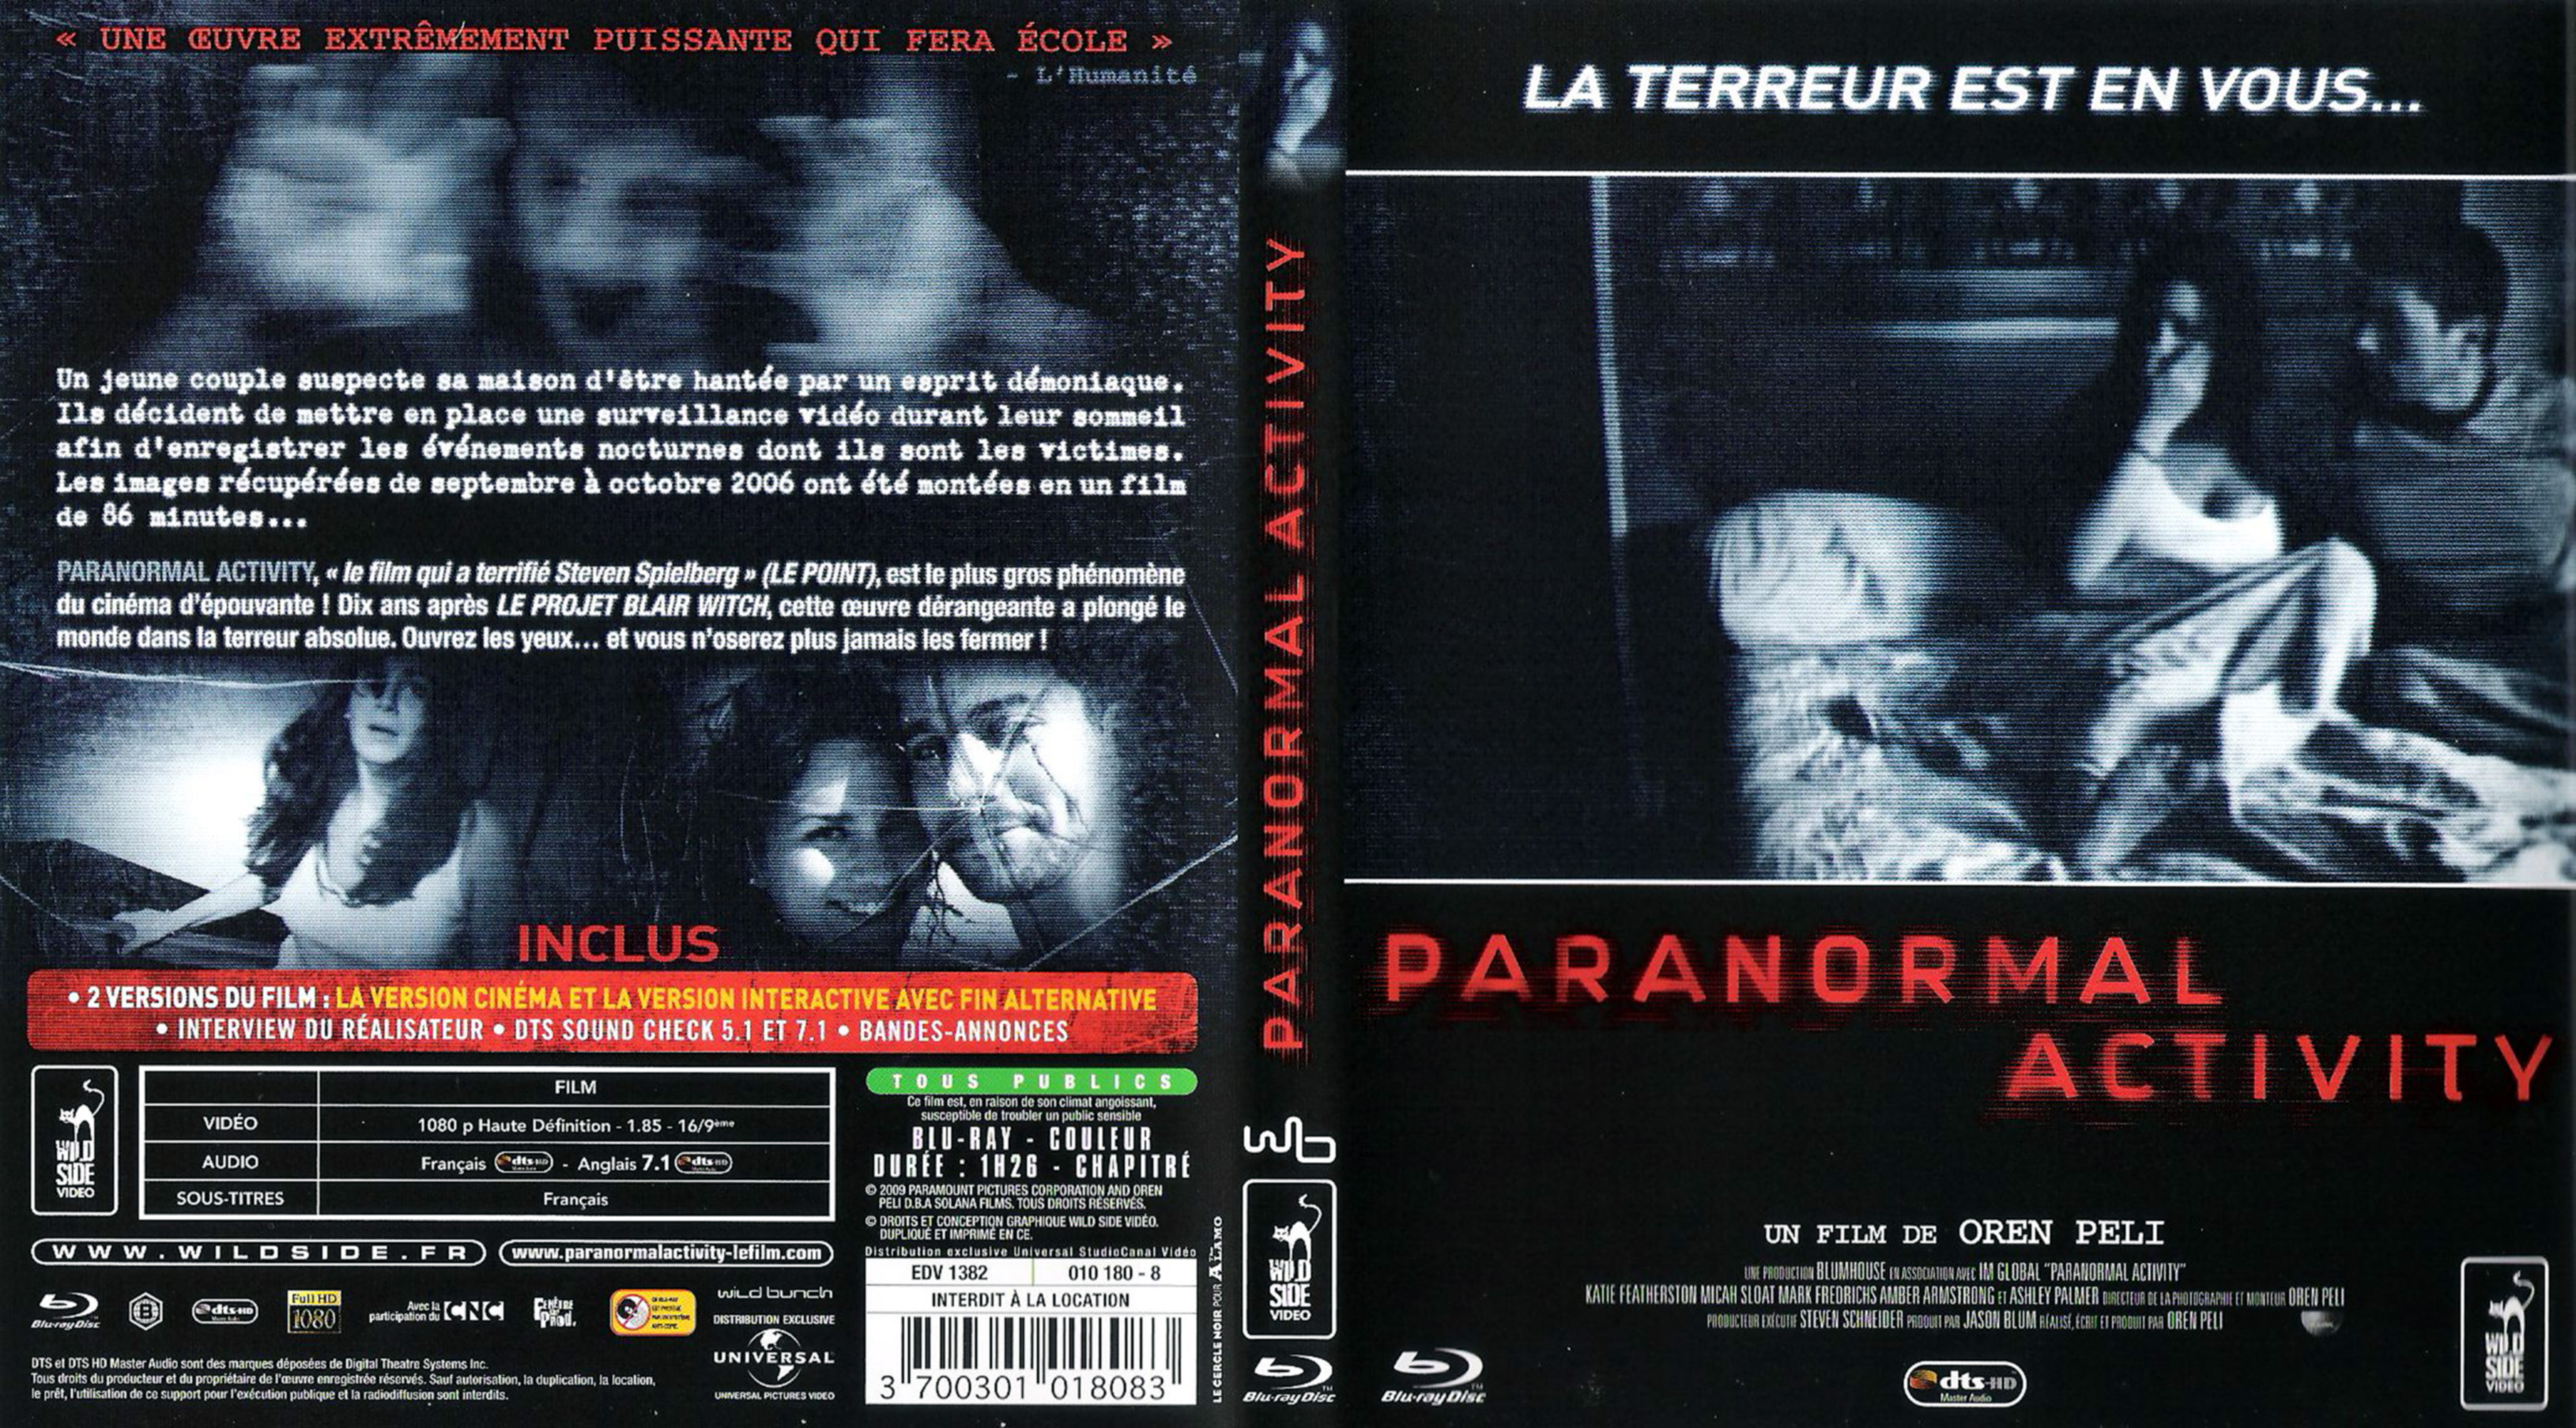 Jaquette DVD Paranormal activity (BLU-RAY)